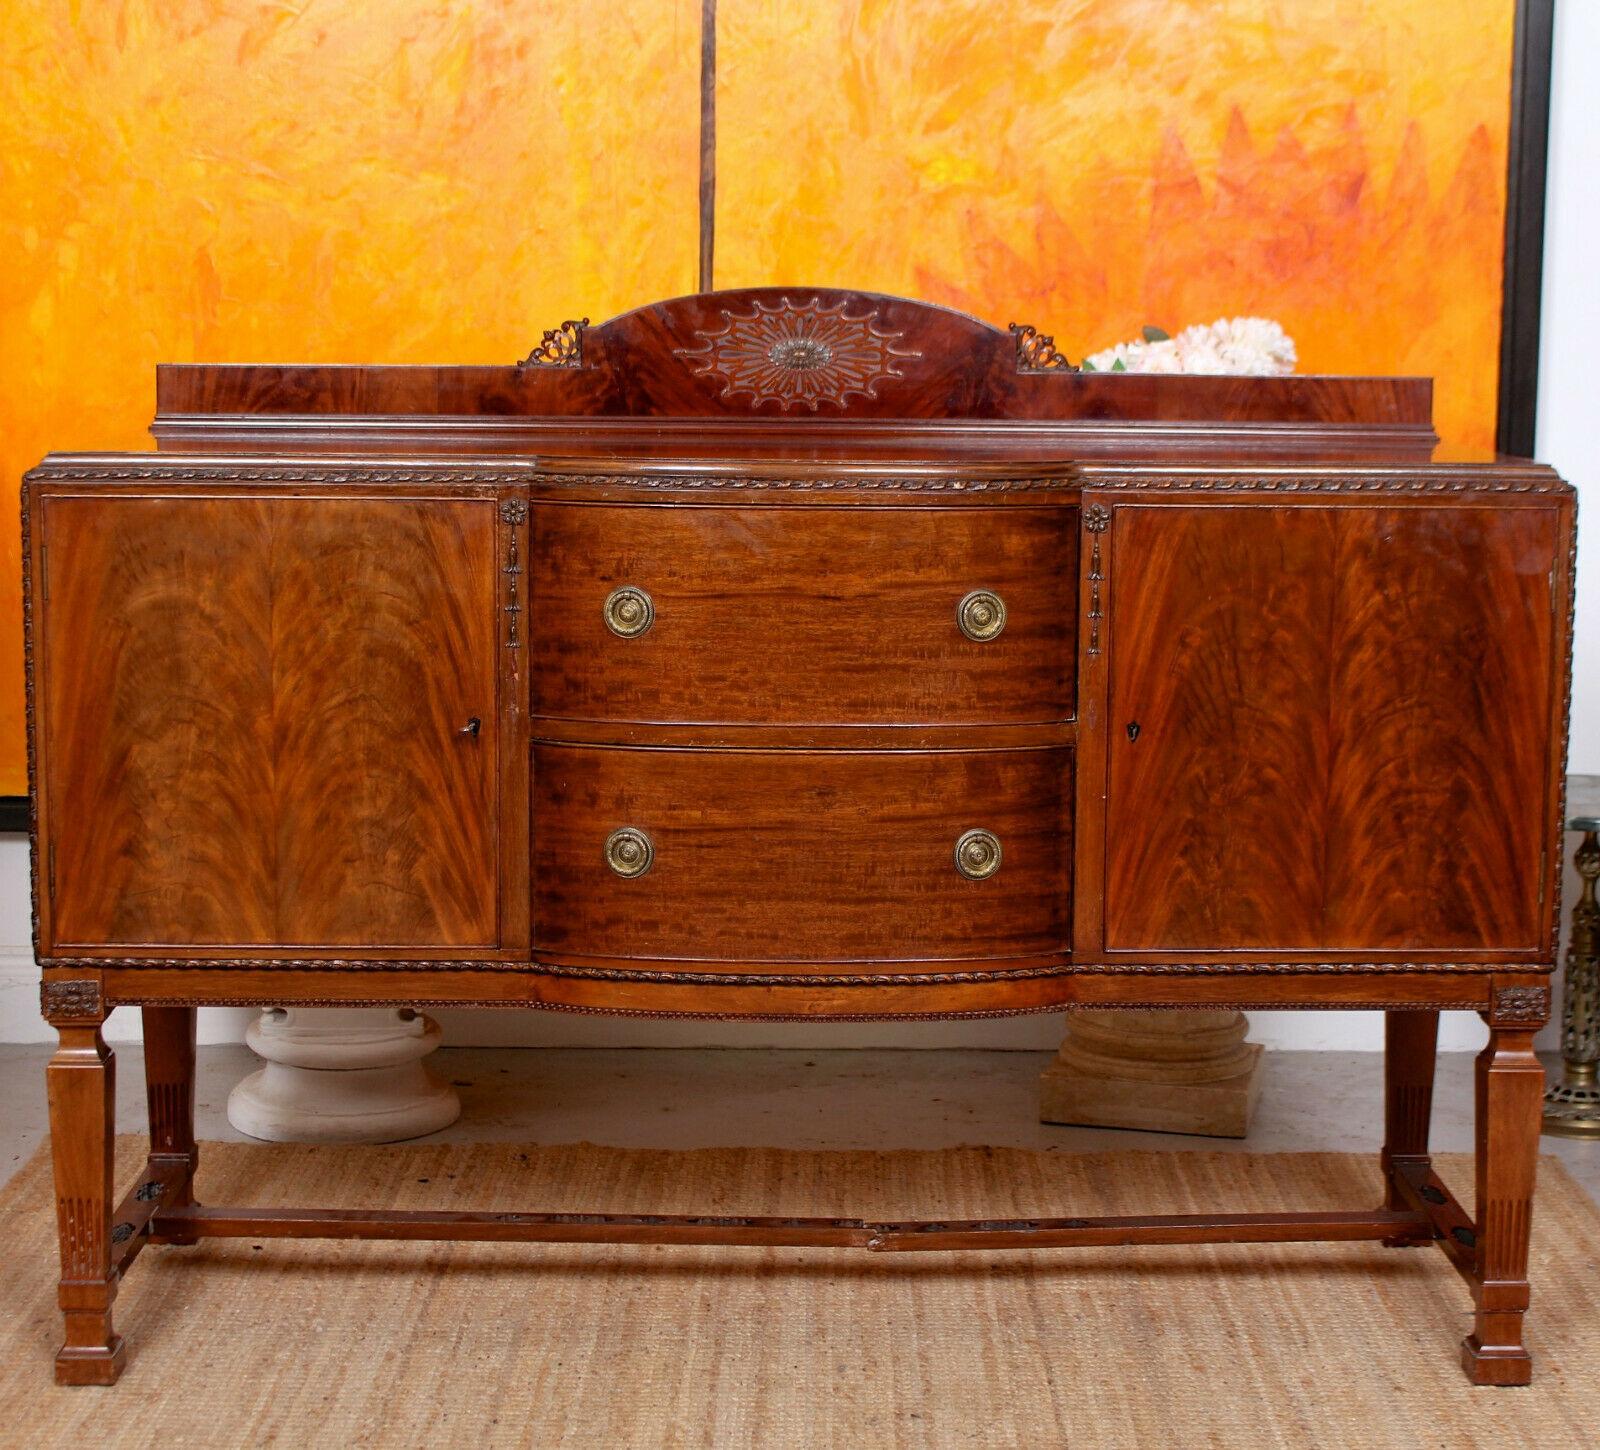 An attractive early 20th century sideboard.

The mahogany boasting a rich polished patina and well figured grain.

The raised gallery with sunburst motif above the shaped top with chamfered edges and carved detailing. A central bank of two